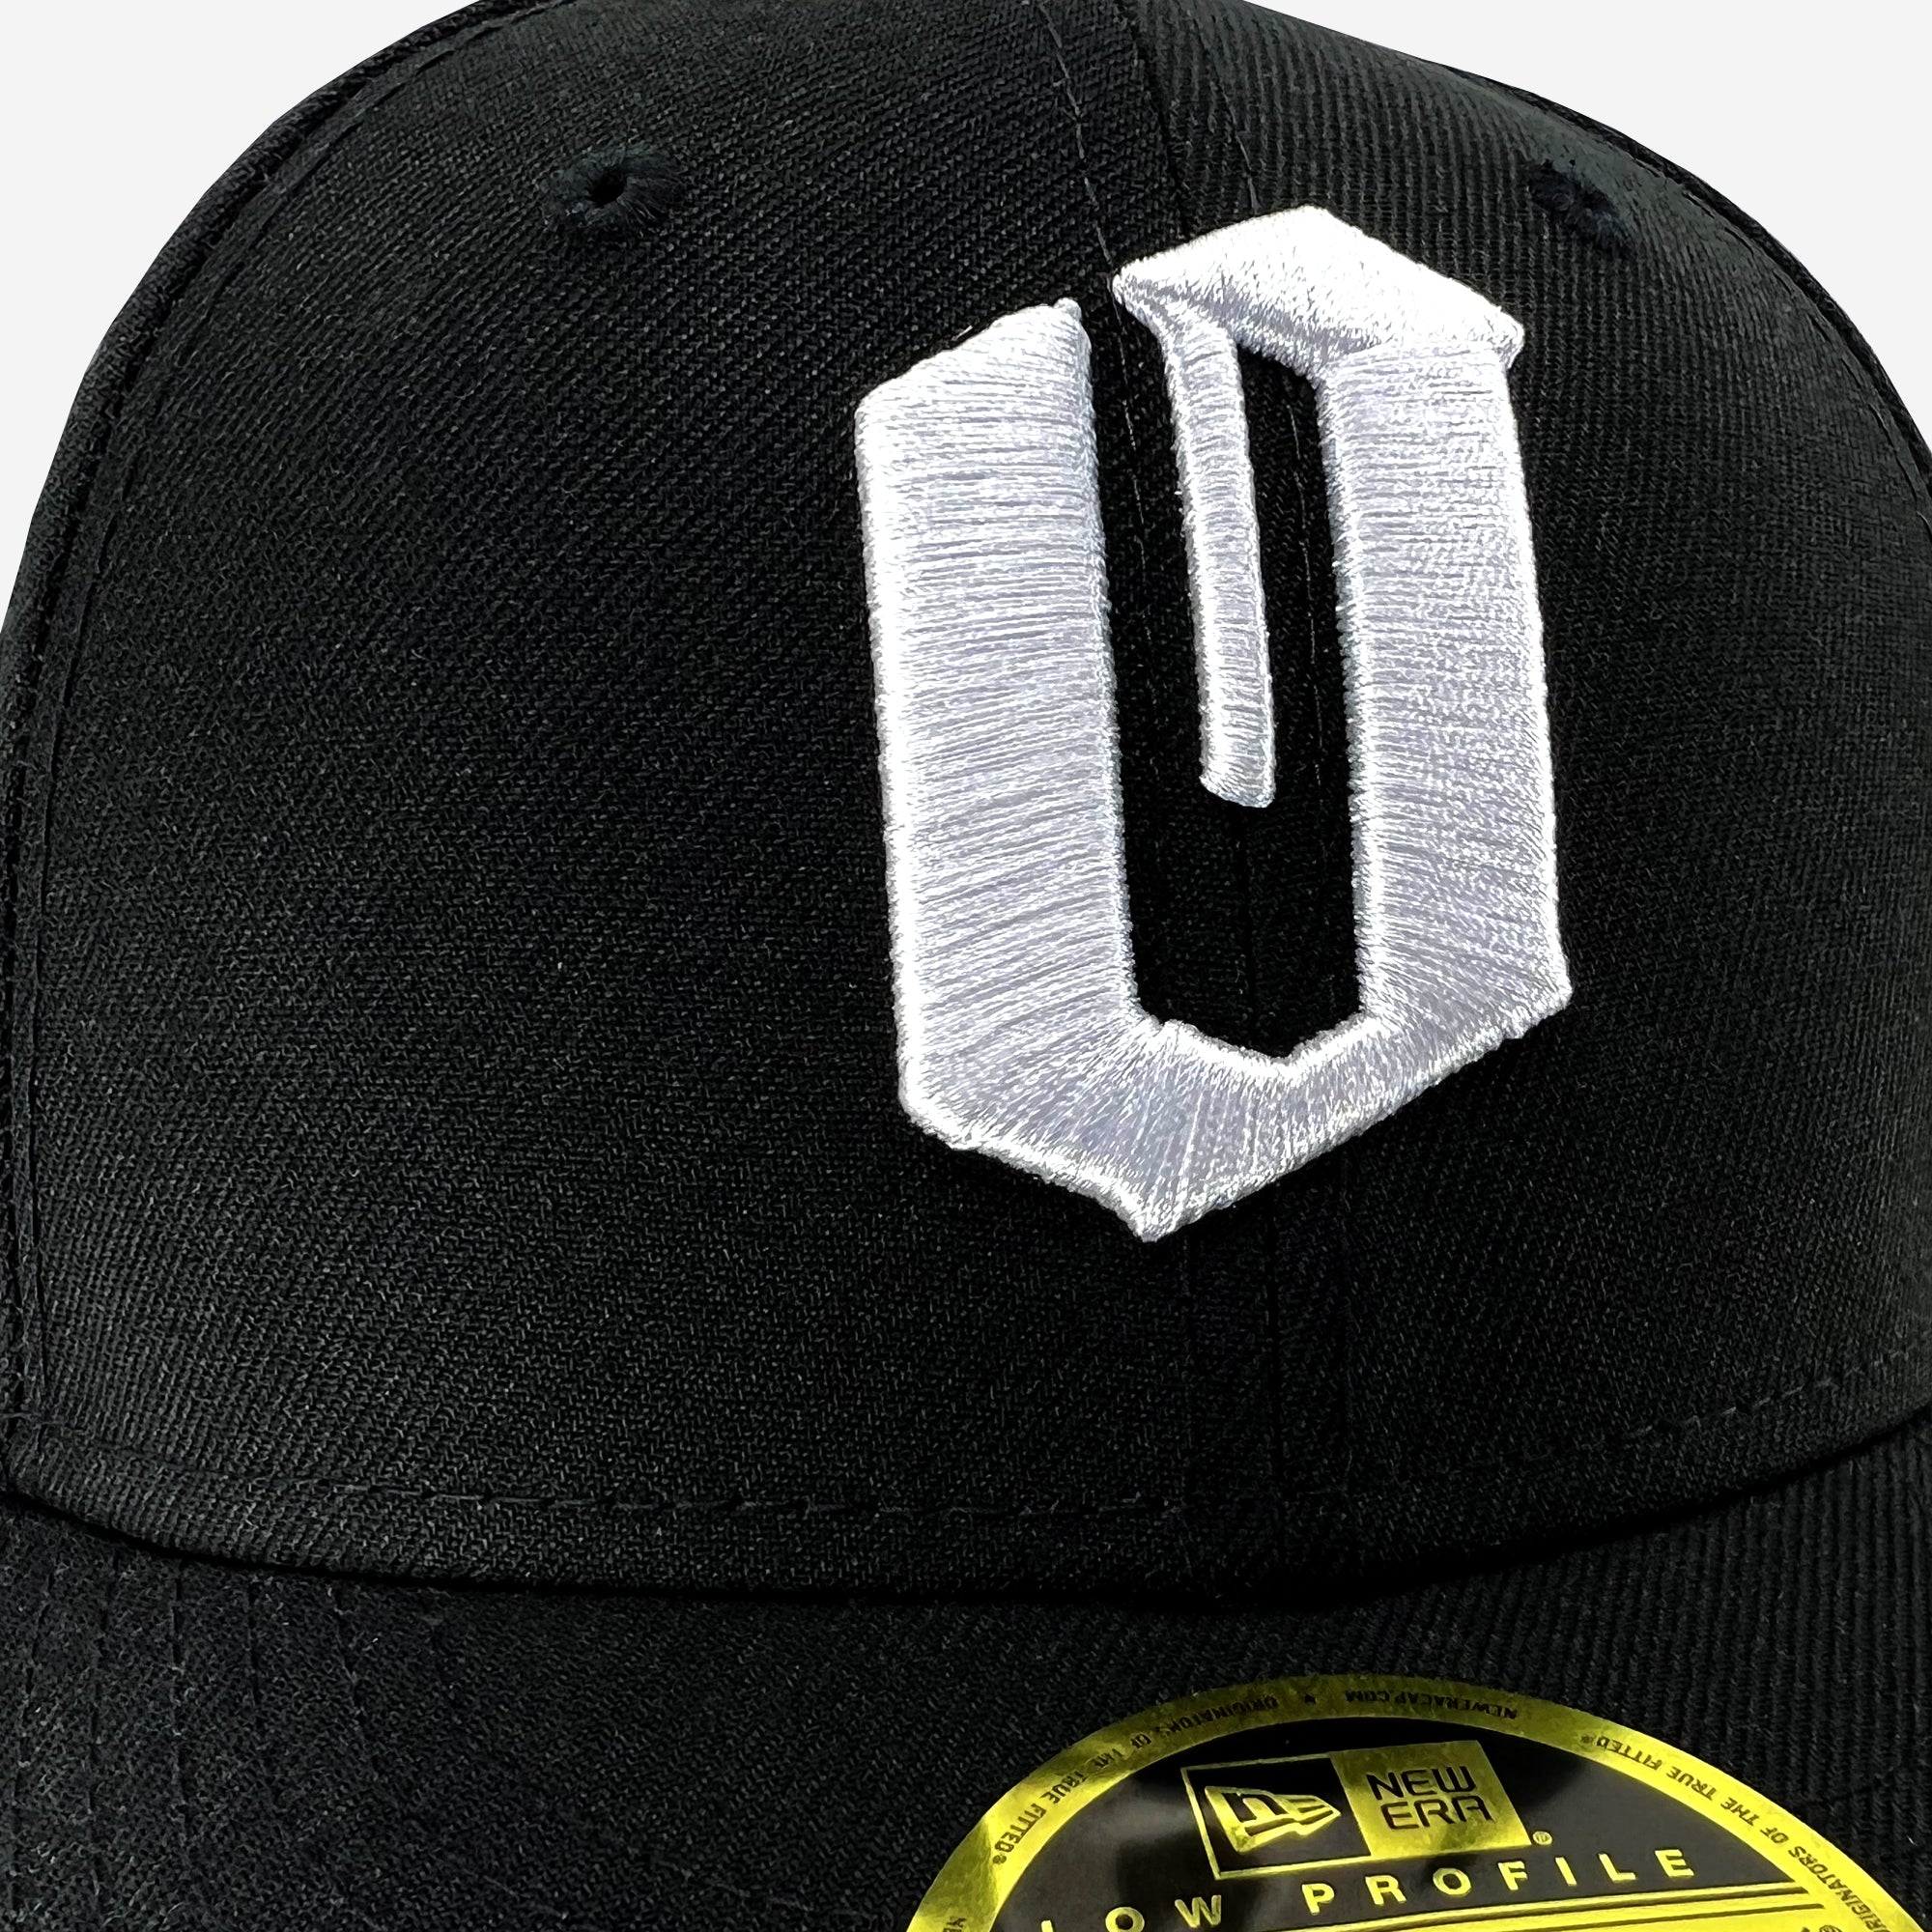 Close-up of embroidered white O logo on a black New Era cap.